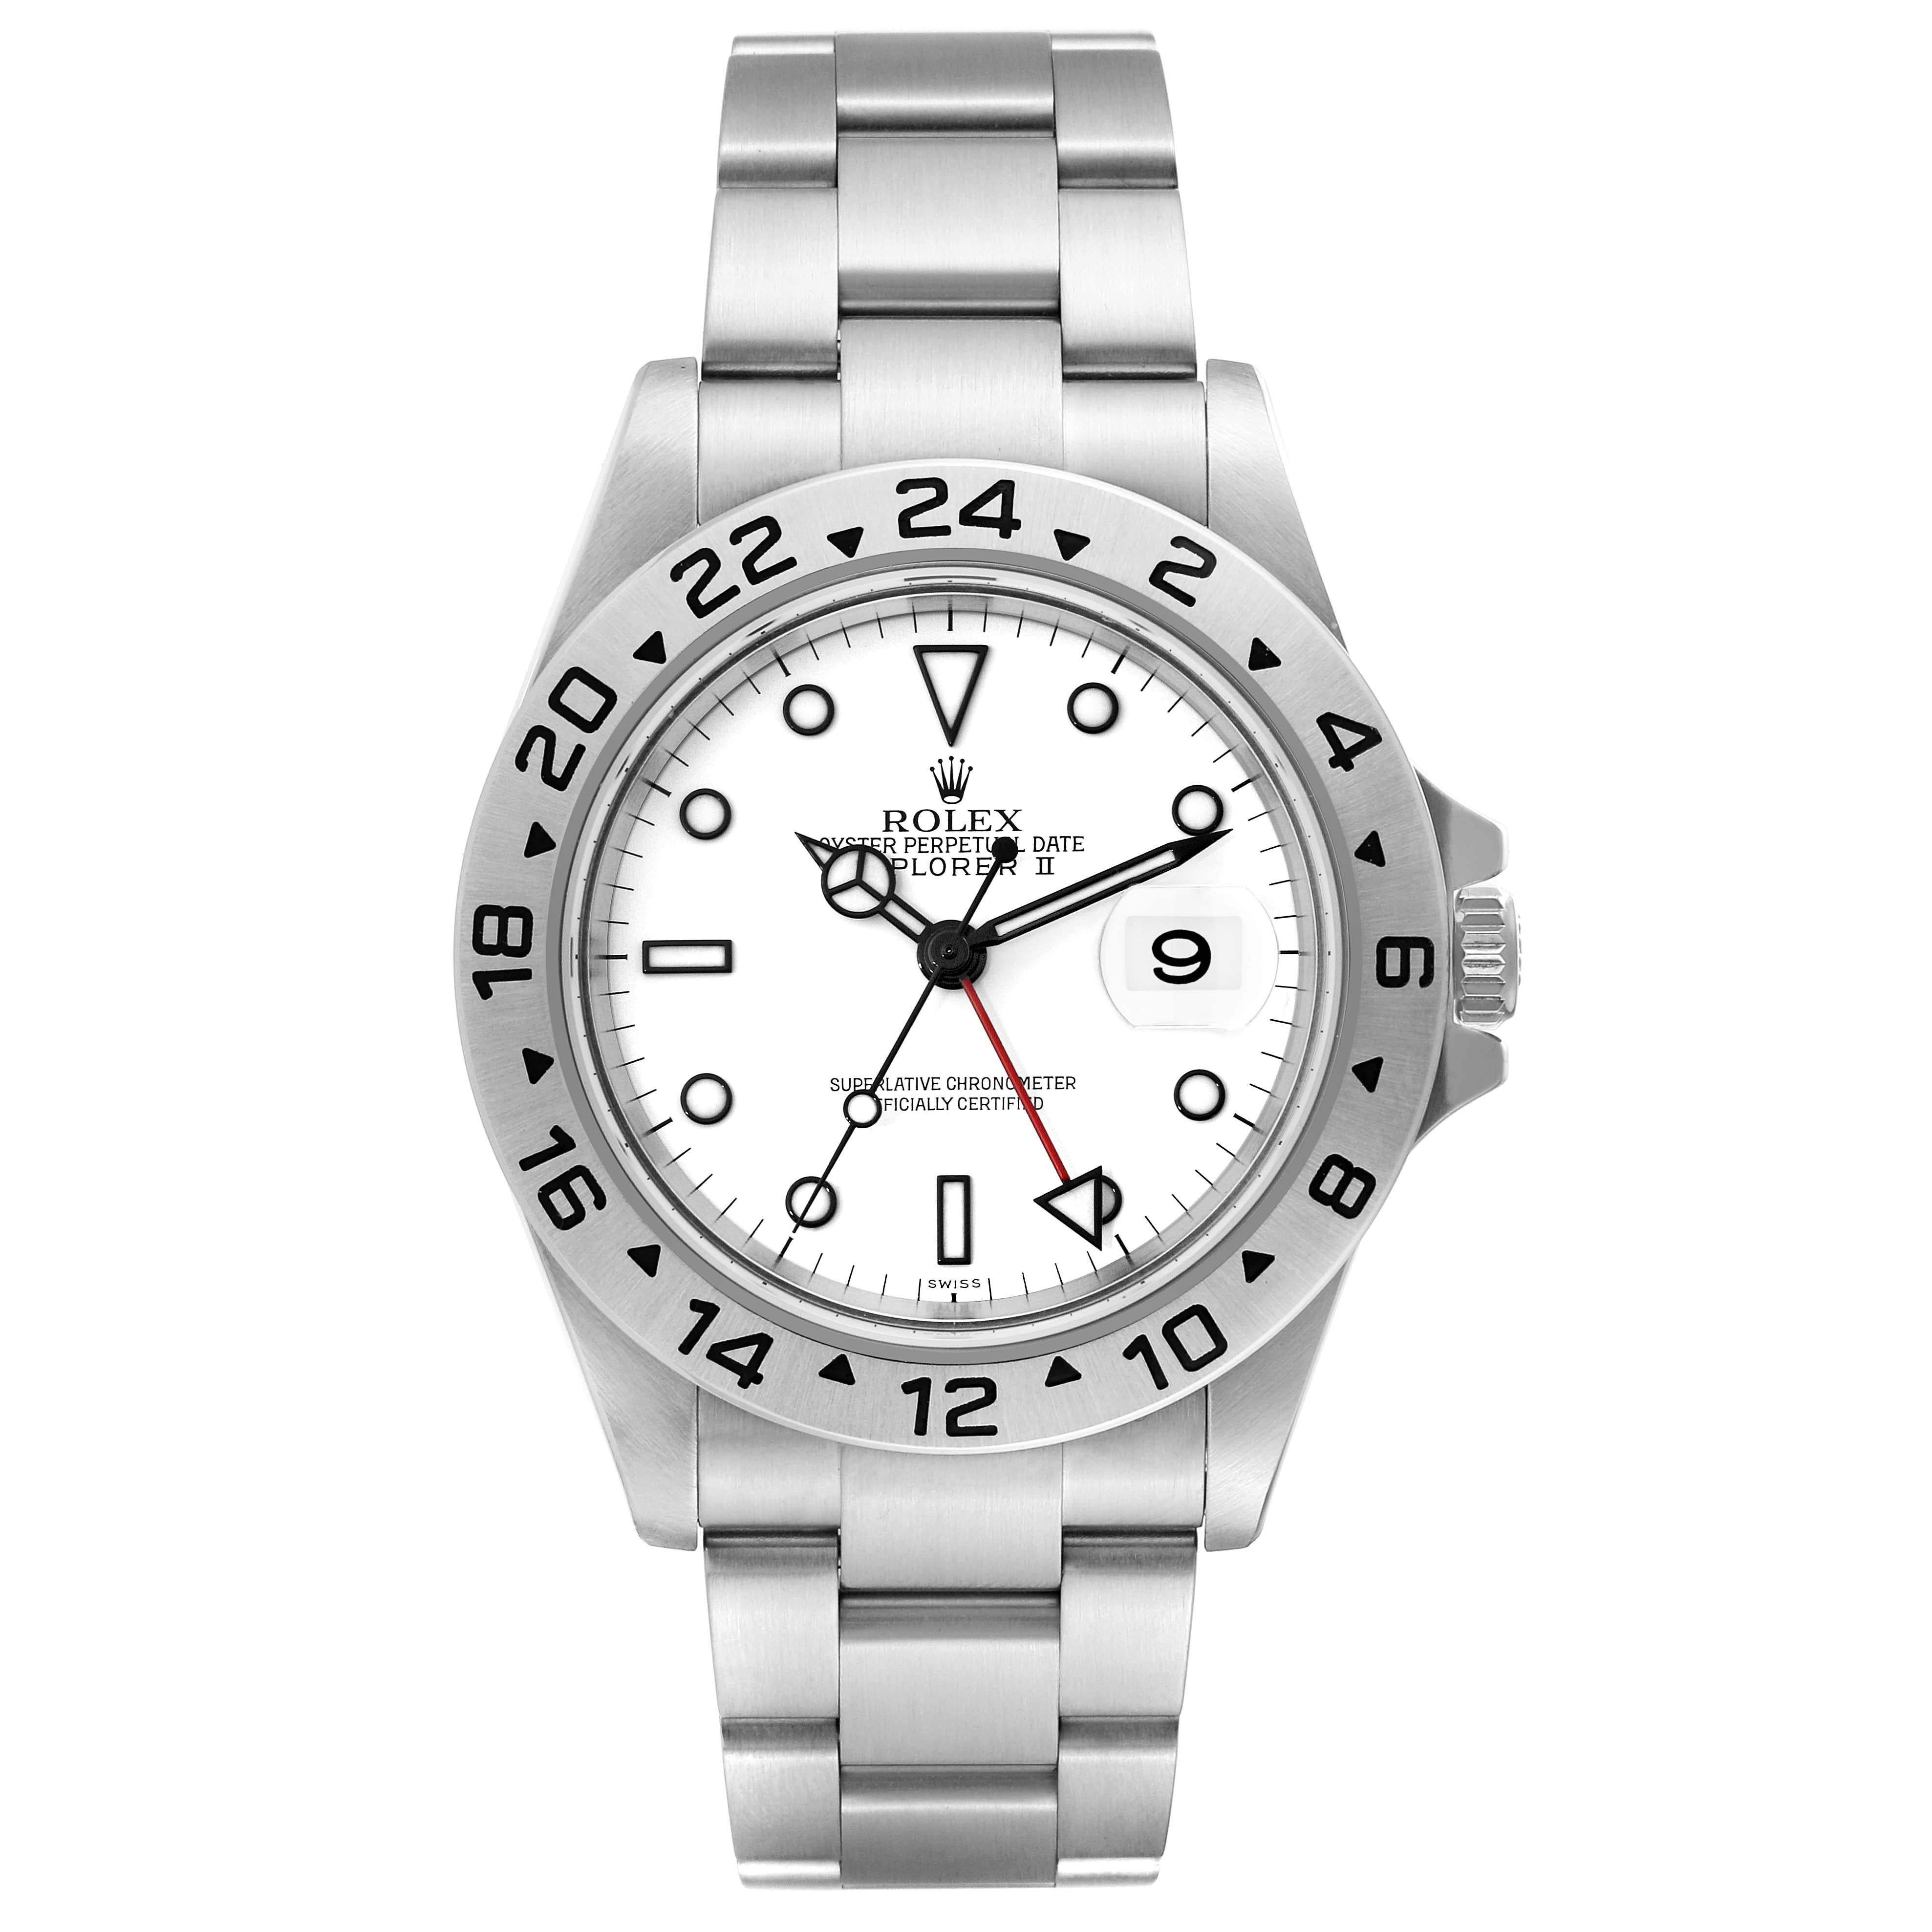 Rolex Explorer II 40mm Polar White Dial Steel Mens Watch 16570 Box Papers. Officially certified chronometer automatic self-winding movement. Stainless steel case 40.0 mm in diameter. Rolex logo on the crown. Stainless steel bezel with engraved 24